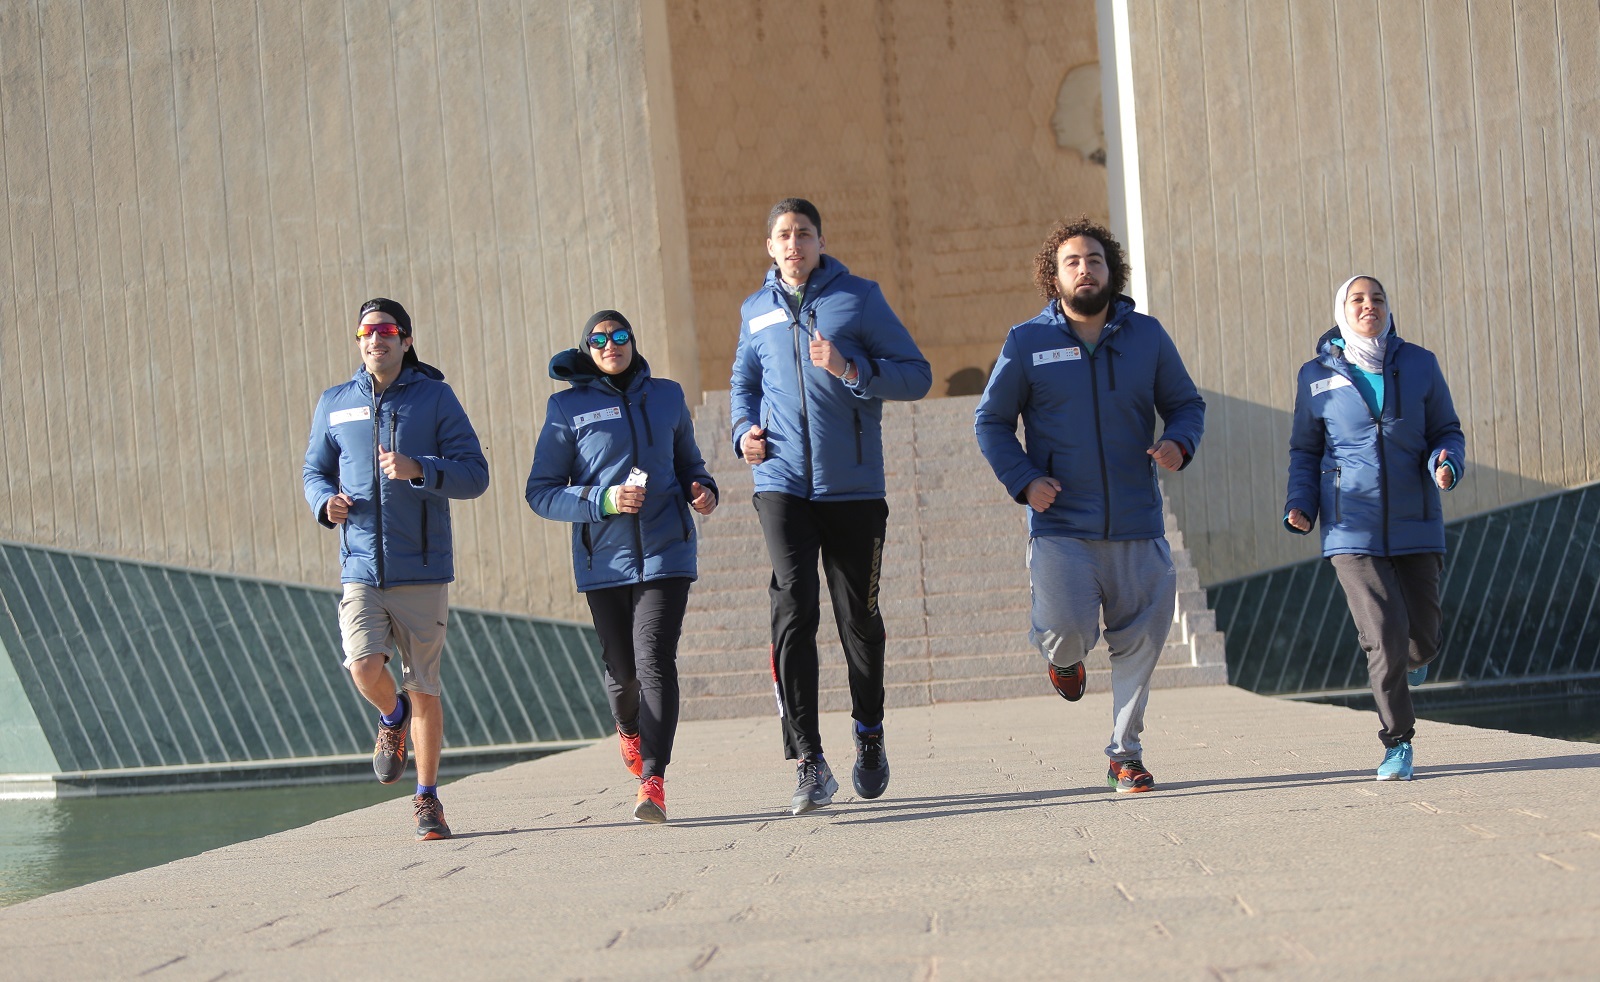 These 4 Egyptian Athletes Are Walking Across Egypt to Raise Awareness on Population Growth